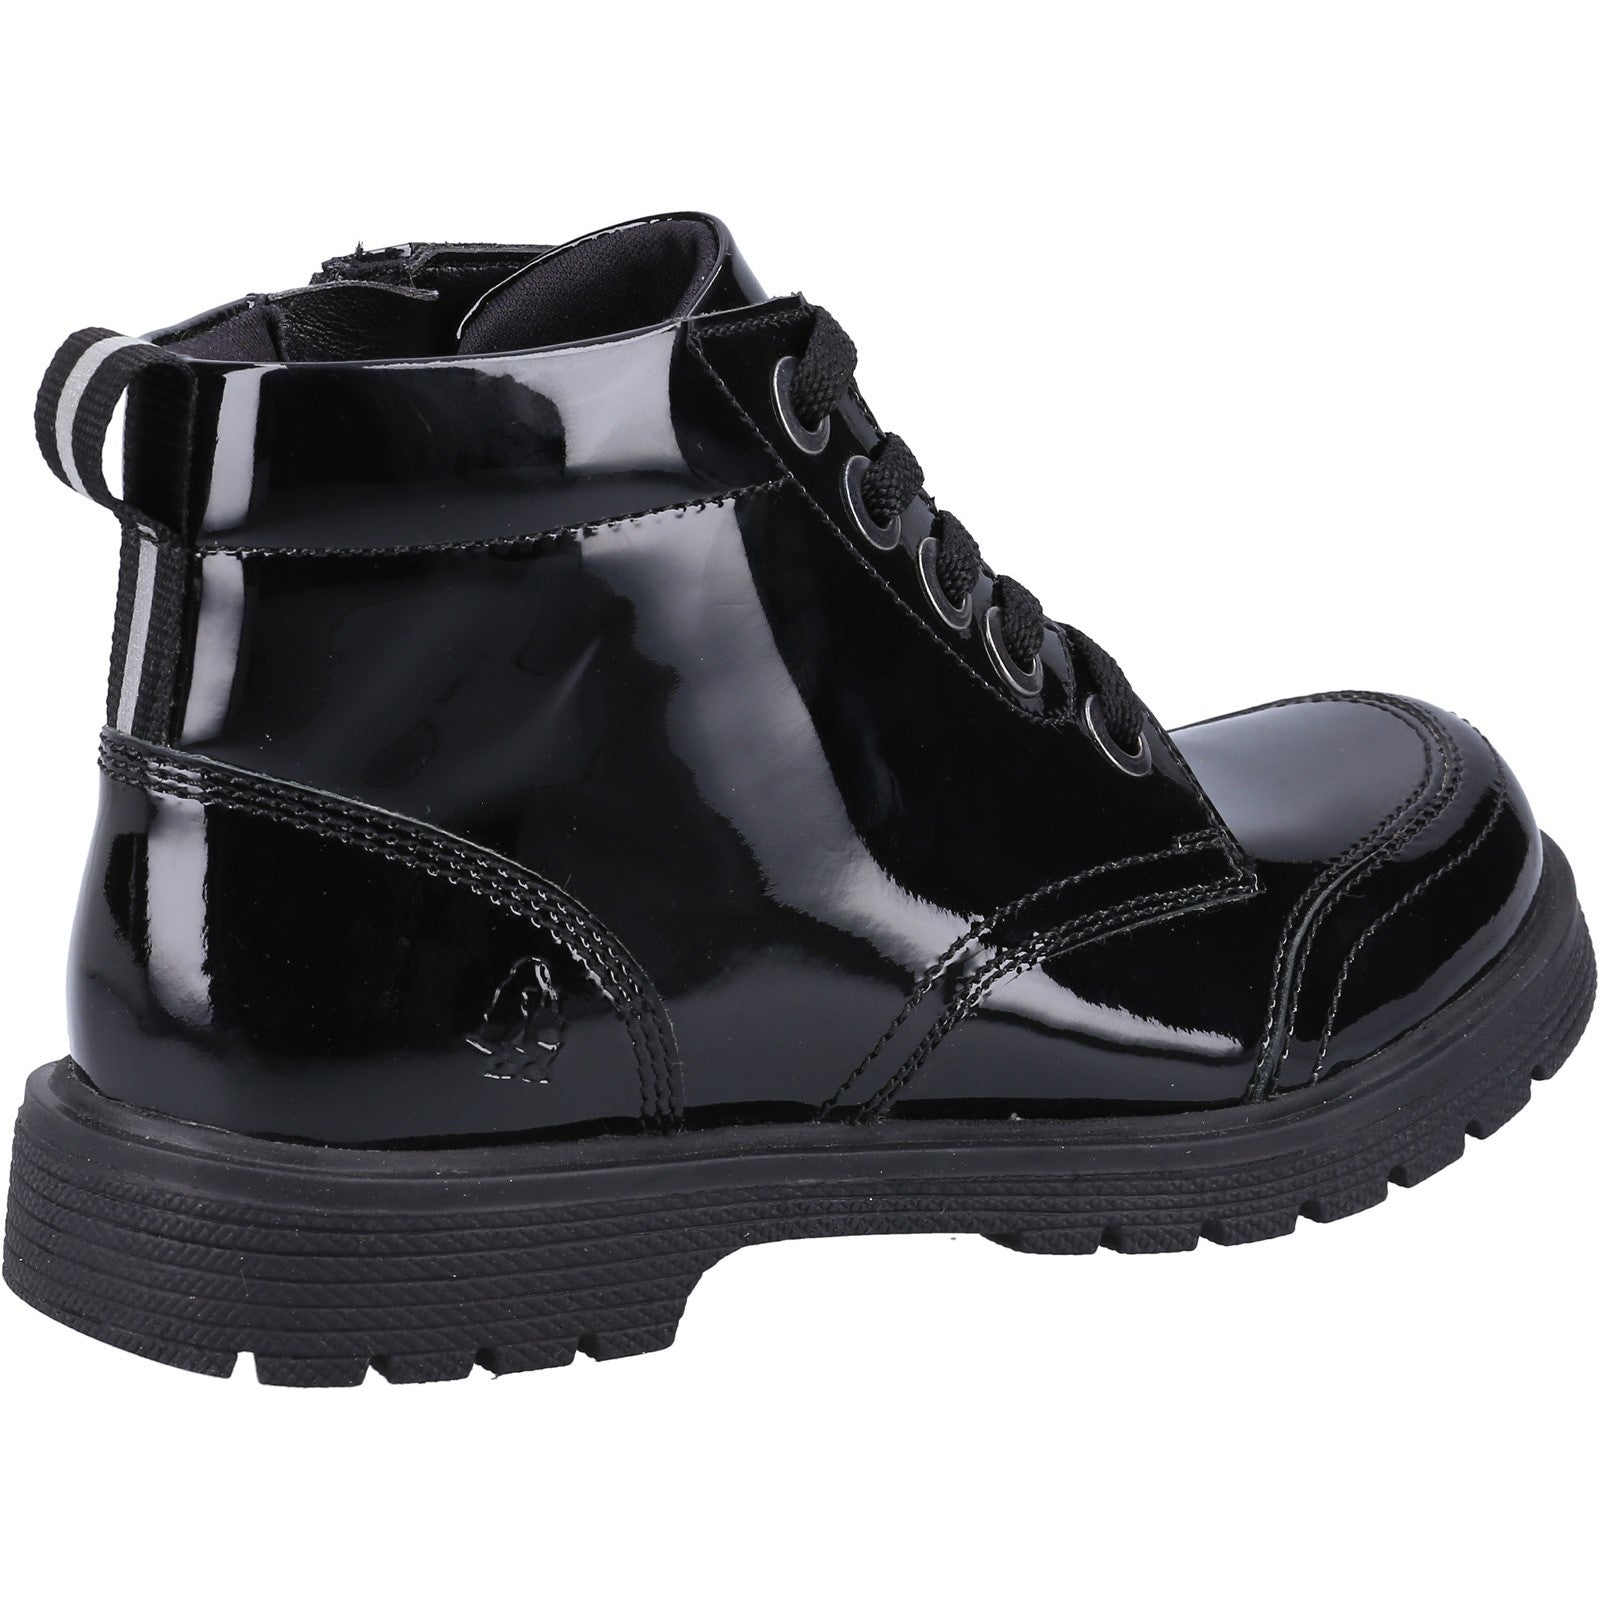 Hush Puppies Girls Jolie Patent Leather Boots - Black